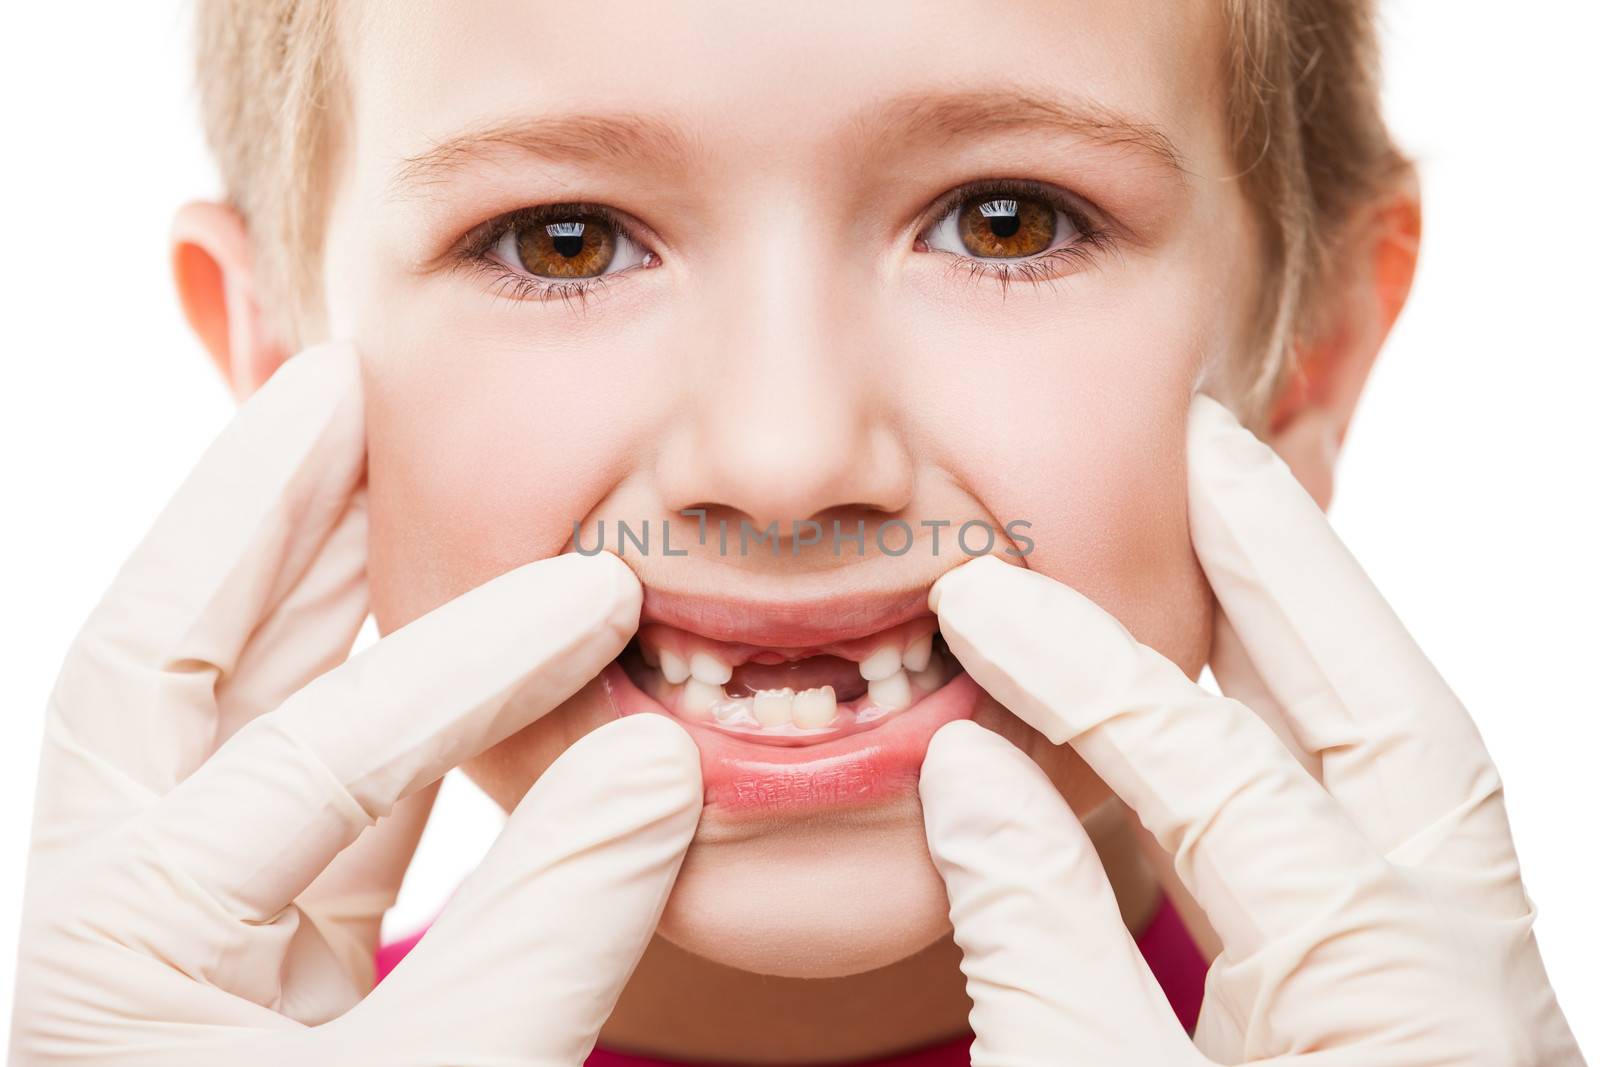 Dental medicine and healthcare - child patient open mouth showing first baby milk or temporary teeth fall out